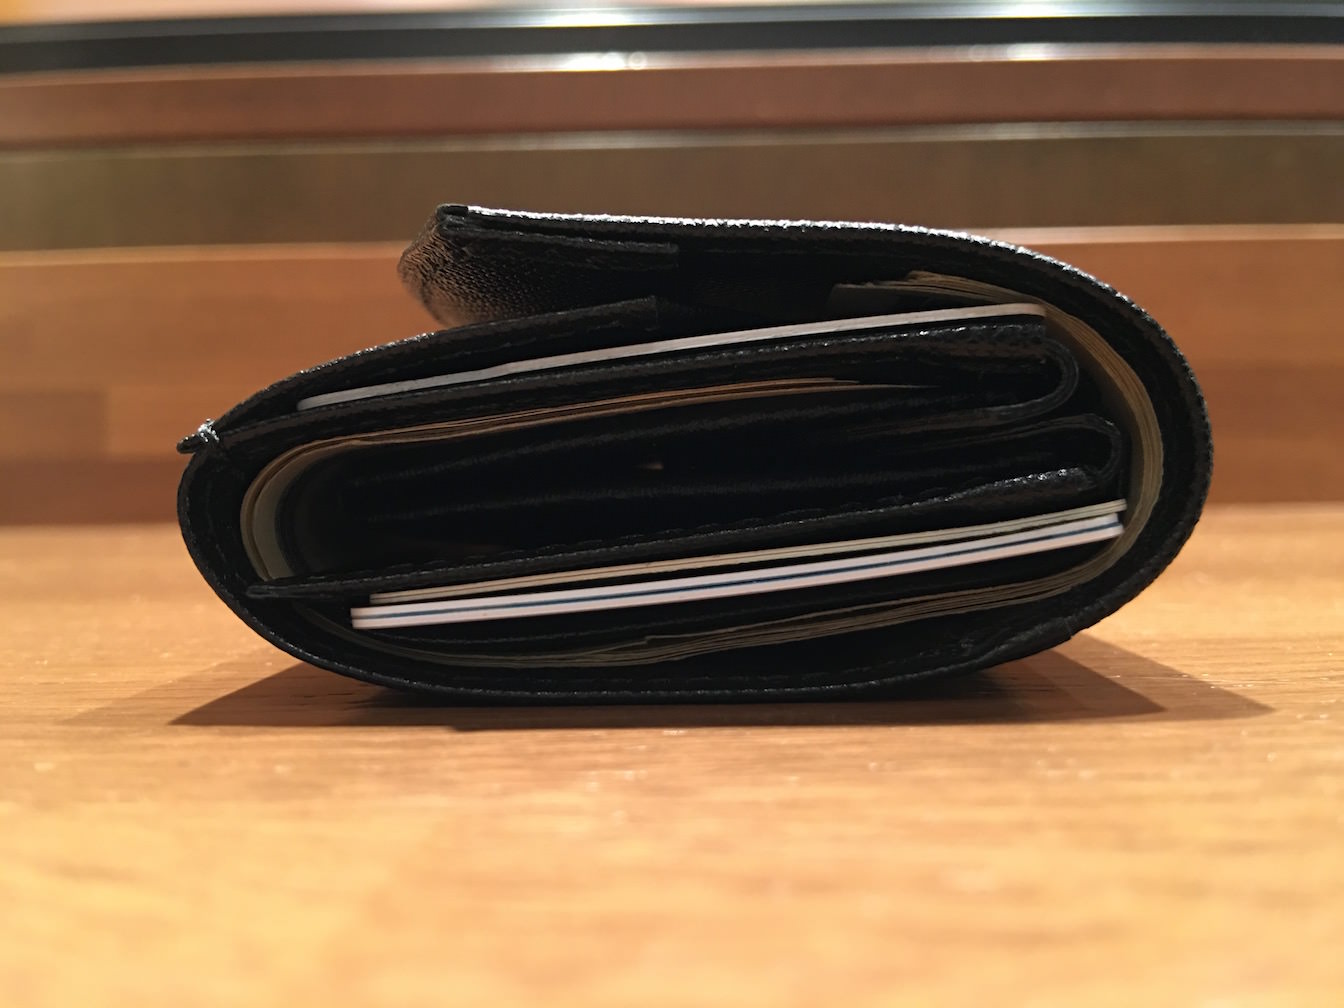 Hammock wallet compact first impression 14